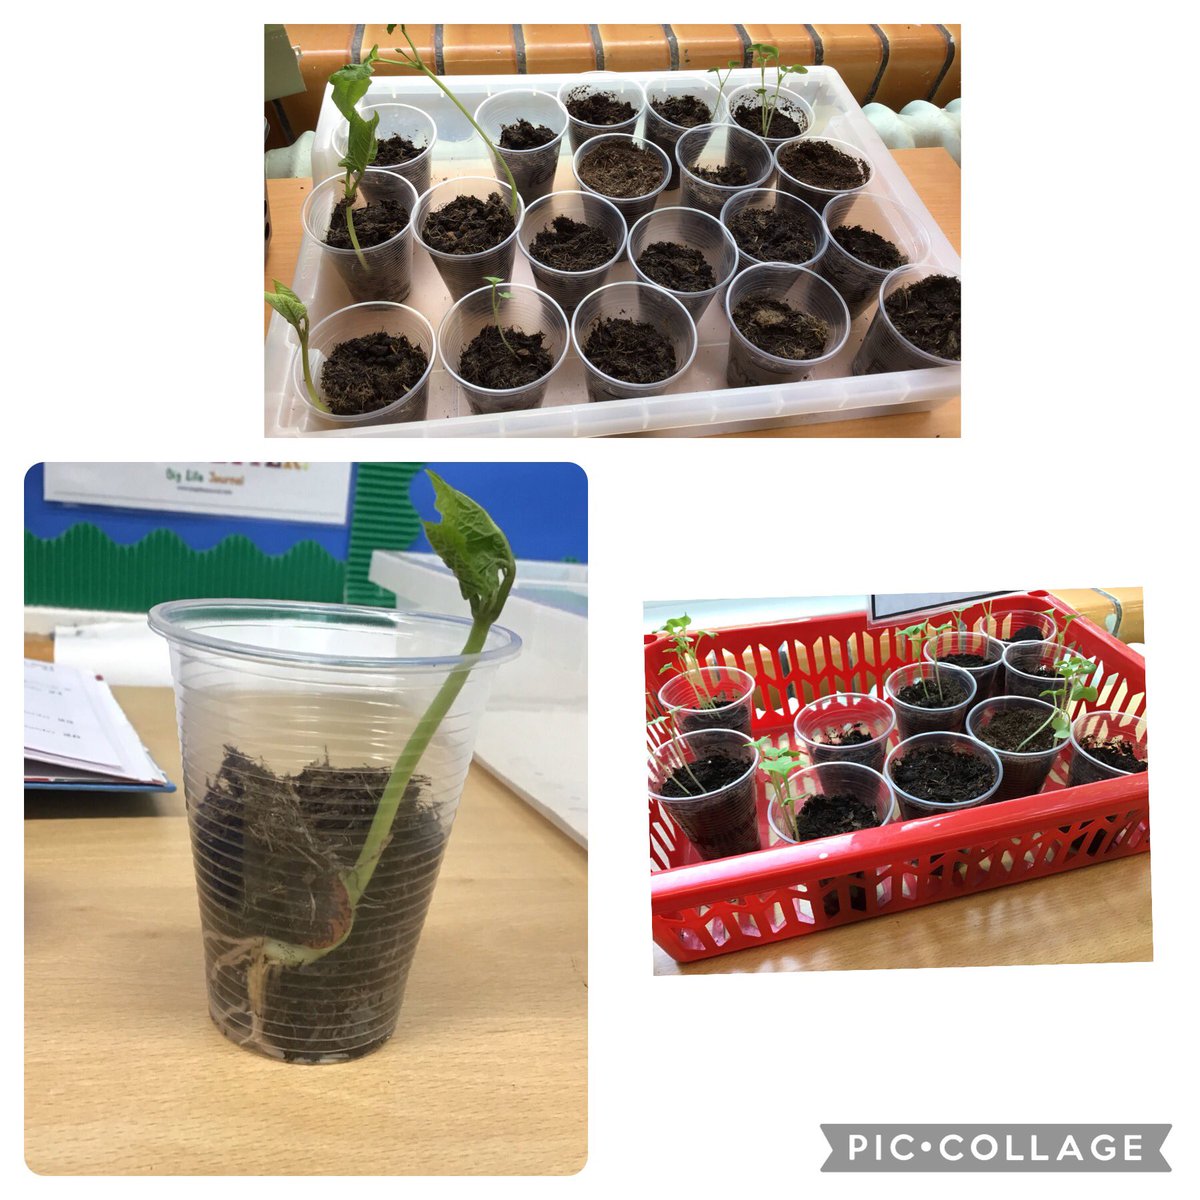 Wow! Look at our growing seeds #curiosity @DevonshireInf